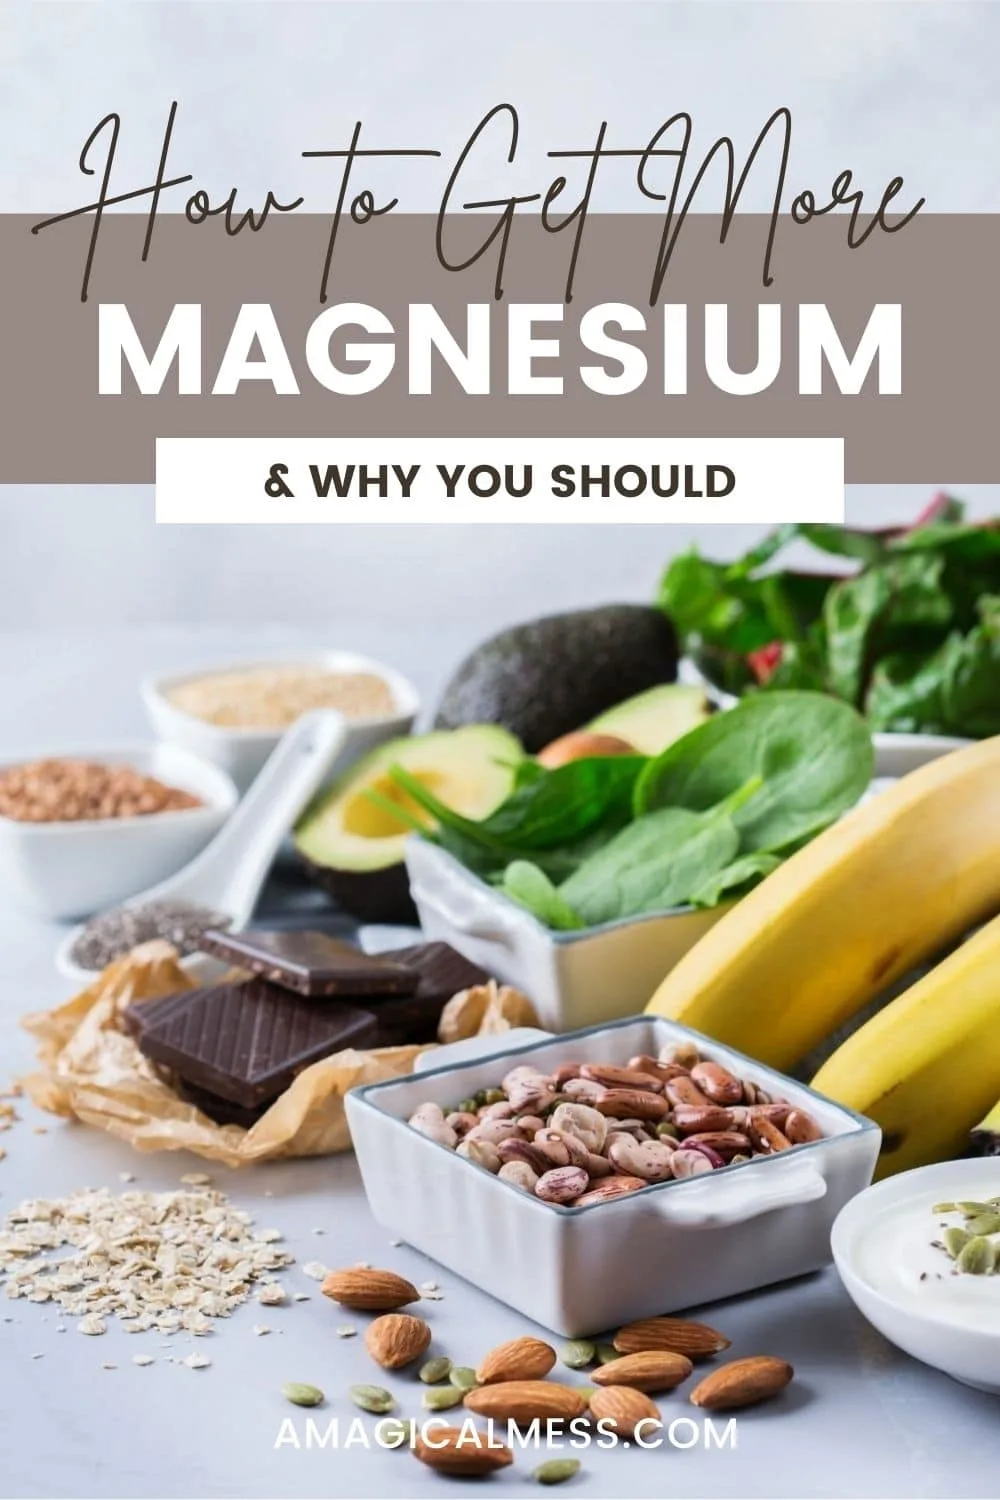 bananas, greens, beans, and other magnesium rich foods